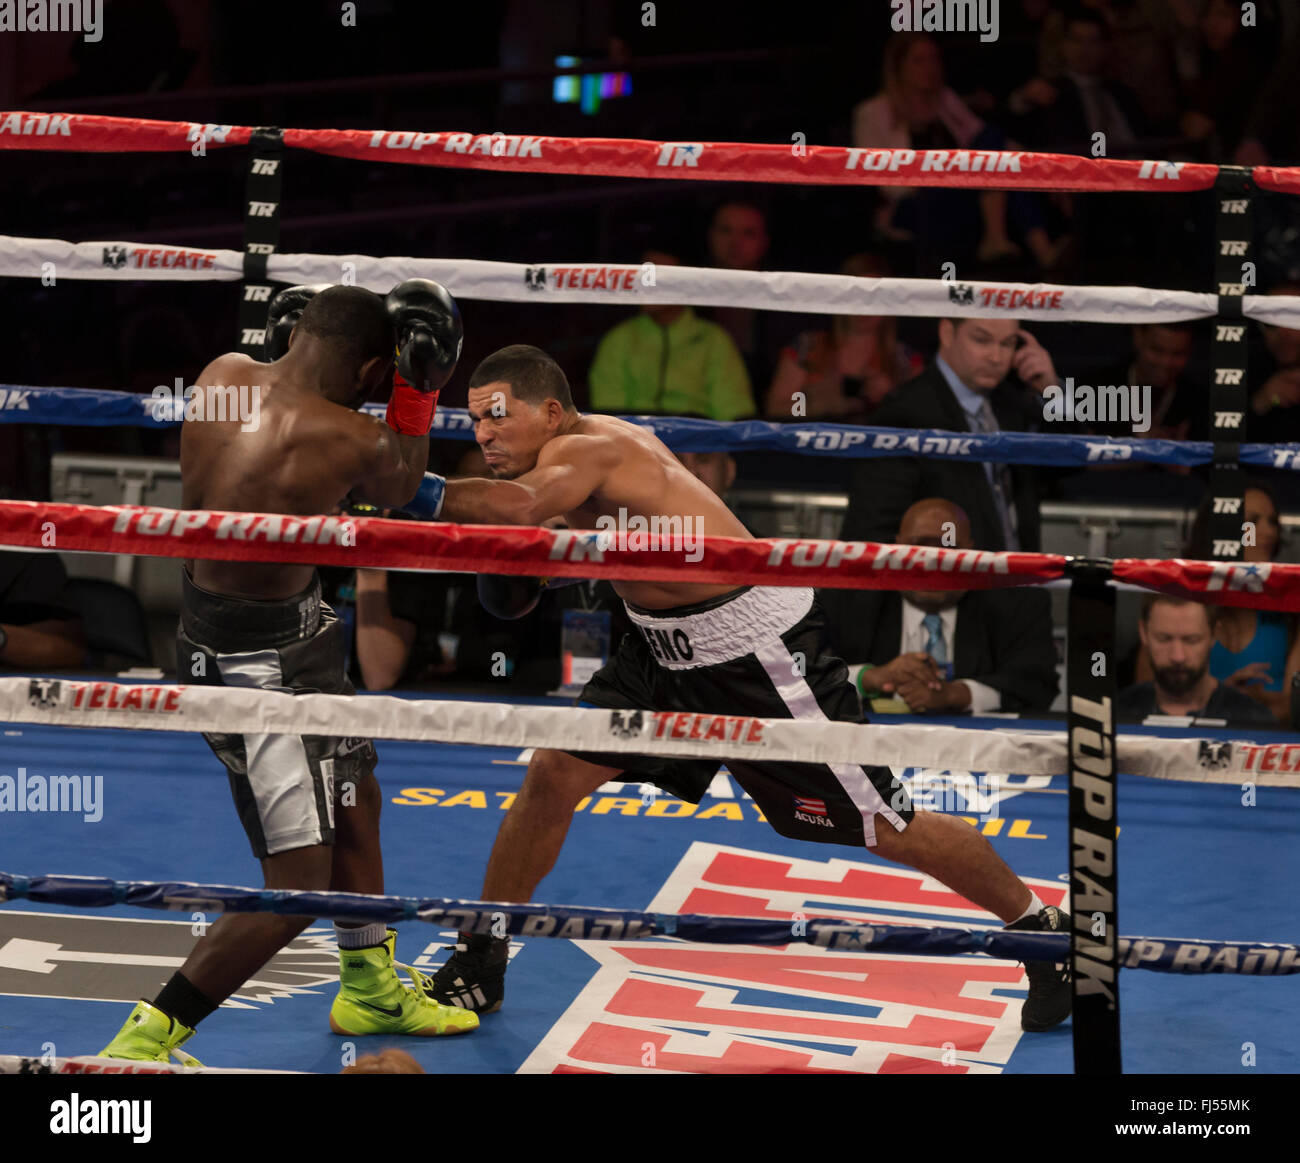 New York, NY USA - February 27, 2016: Emanuel Taylor (black trunks) fights Wilfredo Acuna of Nucaragua in professional boxing match in Super Lightweight category at Madison Square Garden Stock Photo